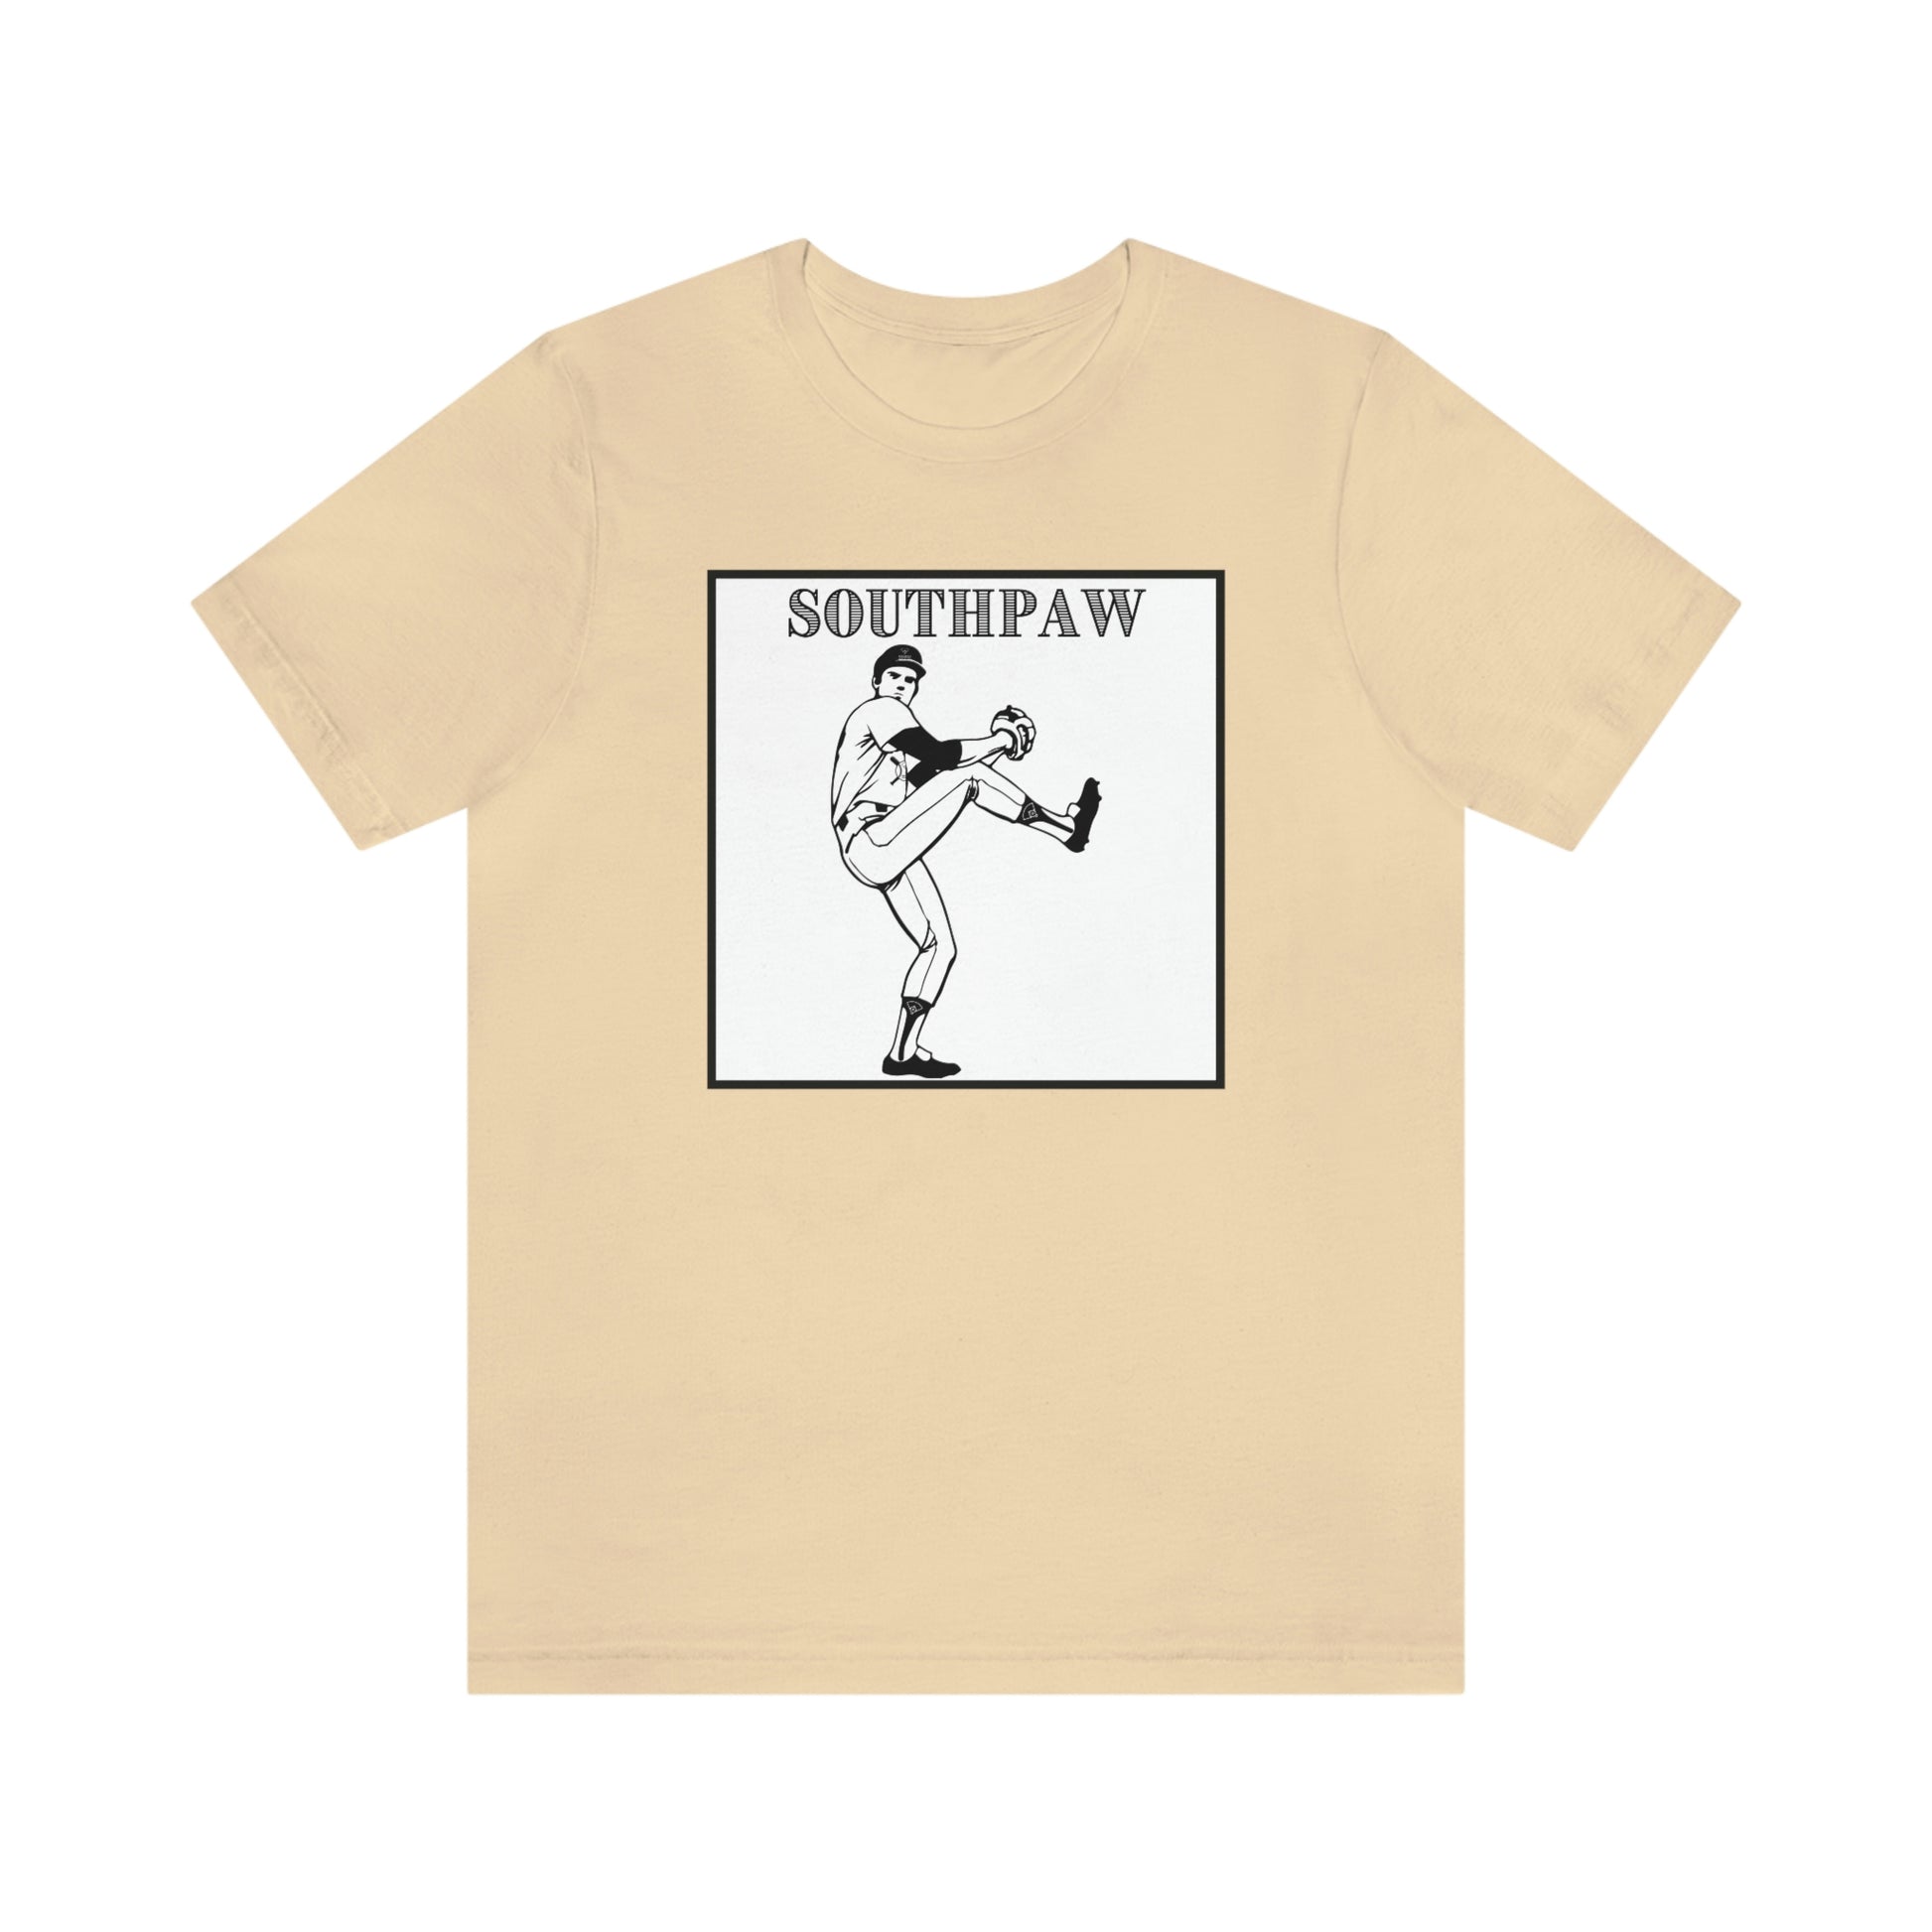 Southpaw T-Shirts for Sale